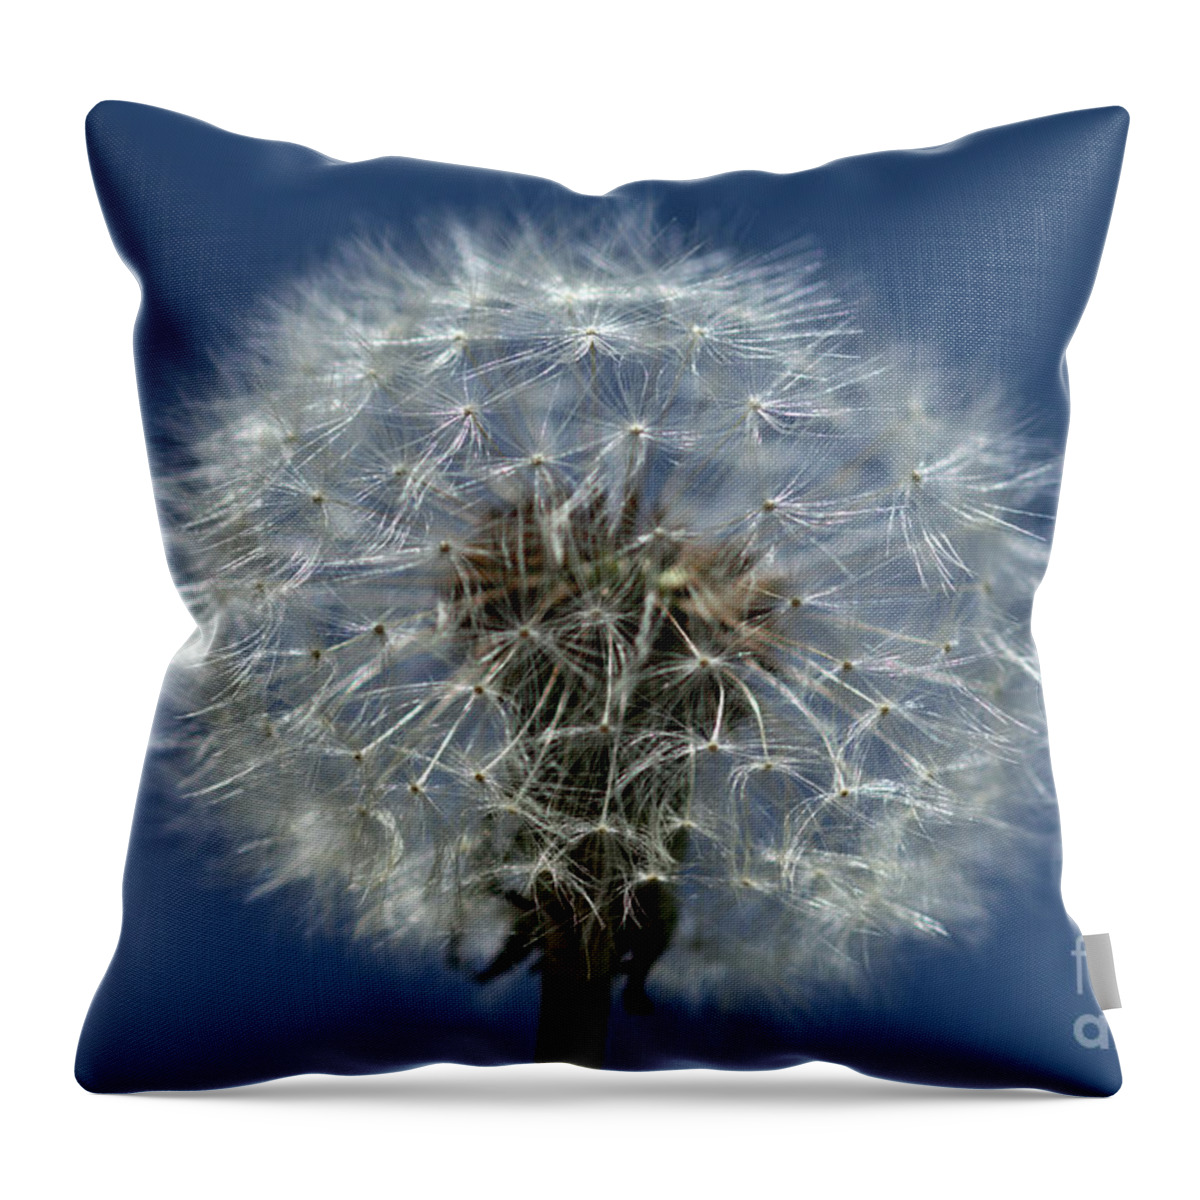 Dandelion Throw Pillow featuring the photograph Dandelion Blowball by Stephen Melia